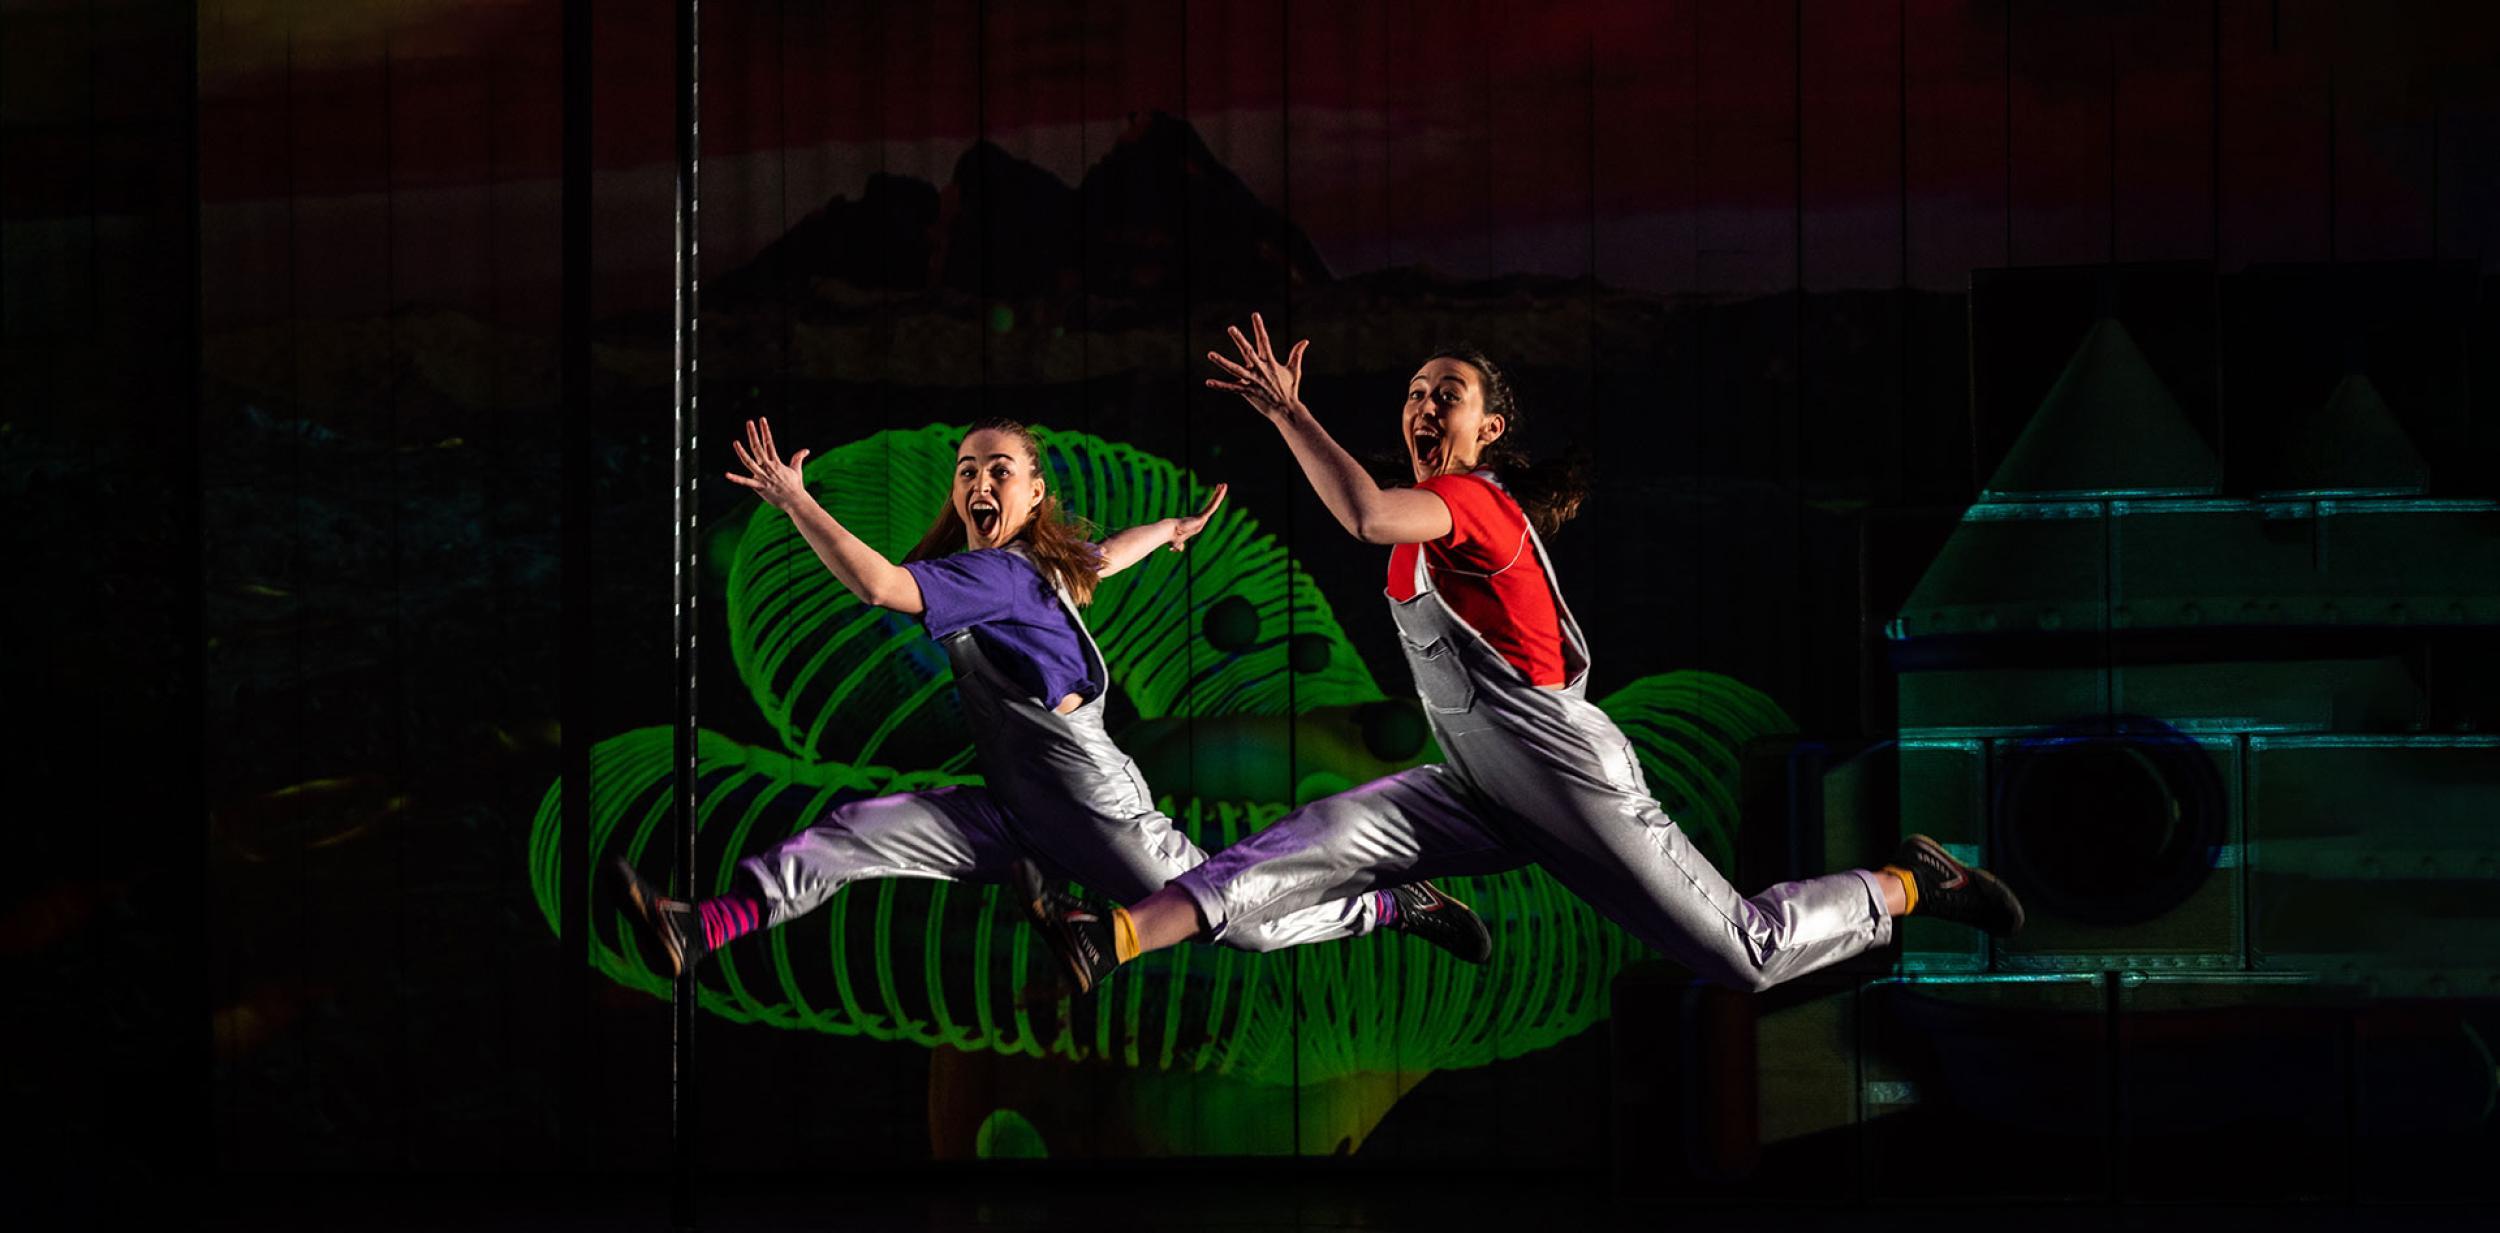 Two people leaping high into the air